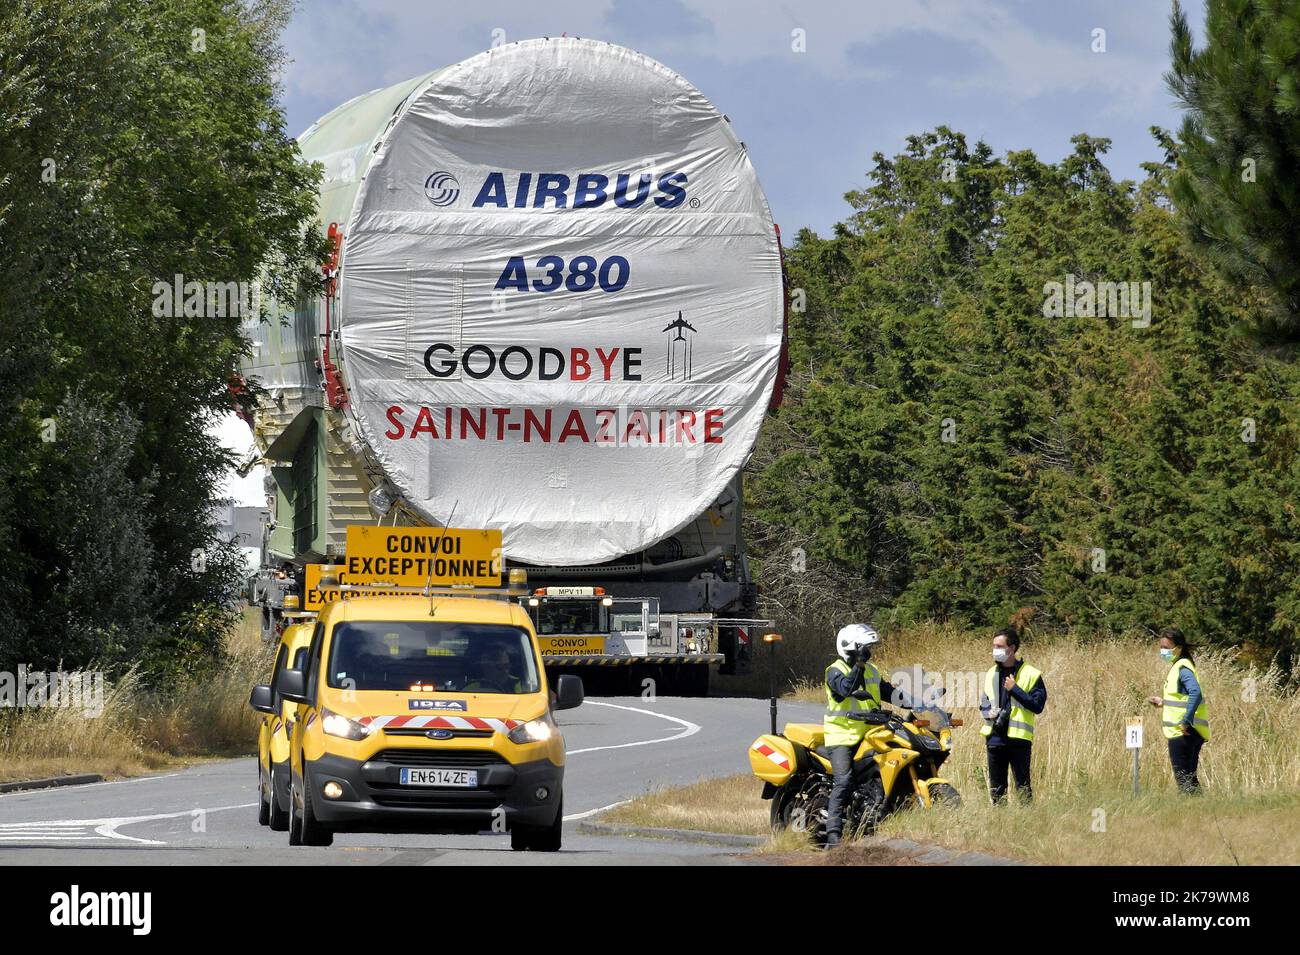 Airbus to stop production of A380 superjumbo jet. The European aerospace giant to stop making world's largest passenger plane after 12 years in service due to weak sales. Airbus A380 Convoy from Saint-Nazaire Airbus factory to Toulouse  Stock Photo